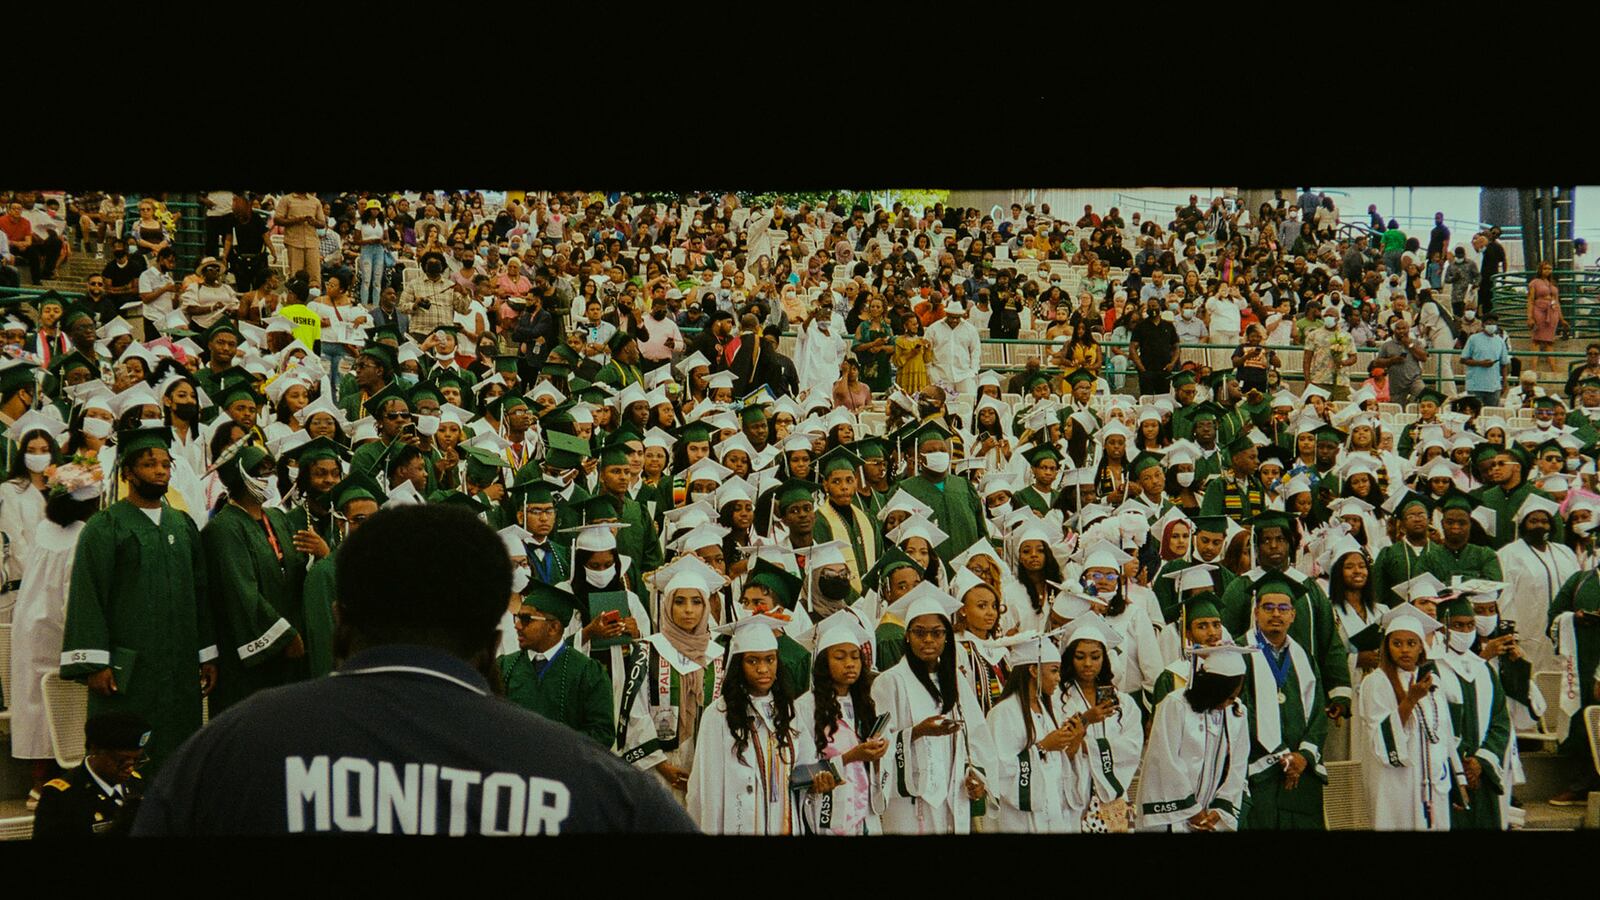 A large group of graduating high school students, wearing green and white caps and gowns, stand in neat rows as their parents look on behind them.